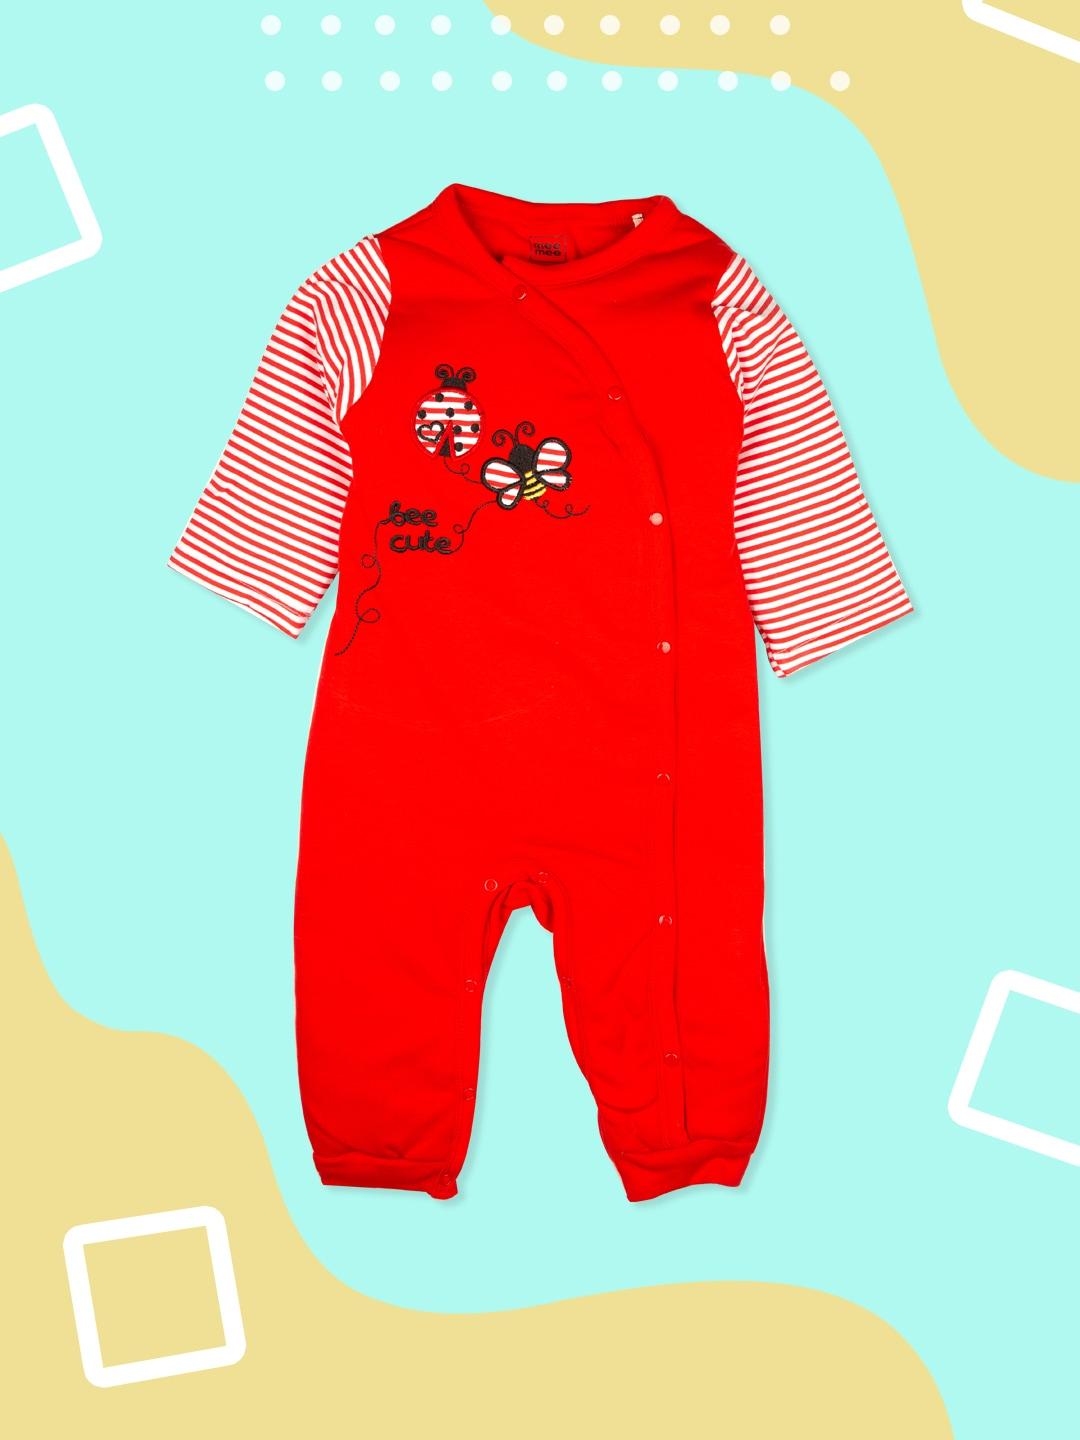 meemee infants red & white appliqued rompers